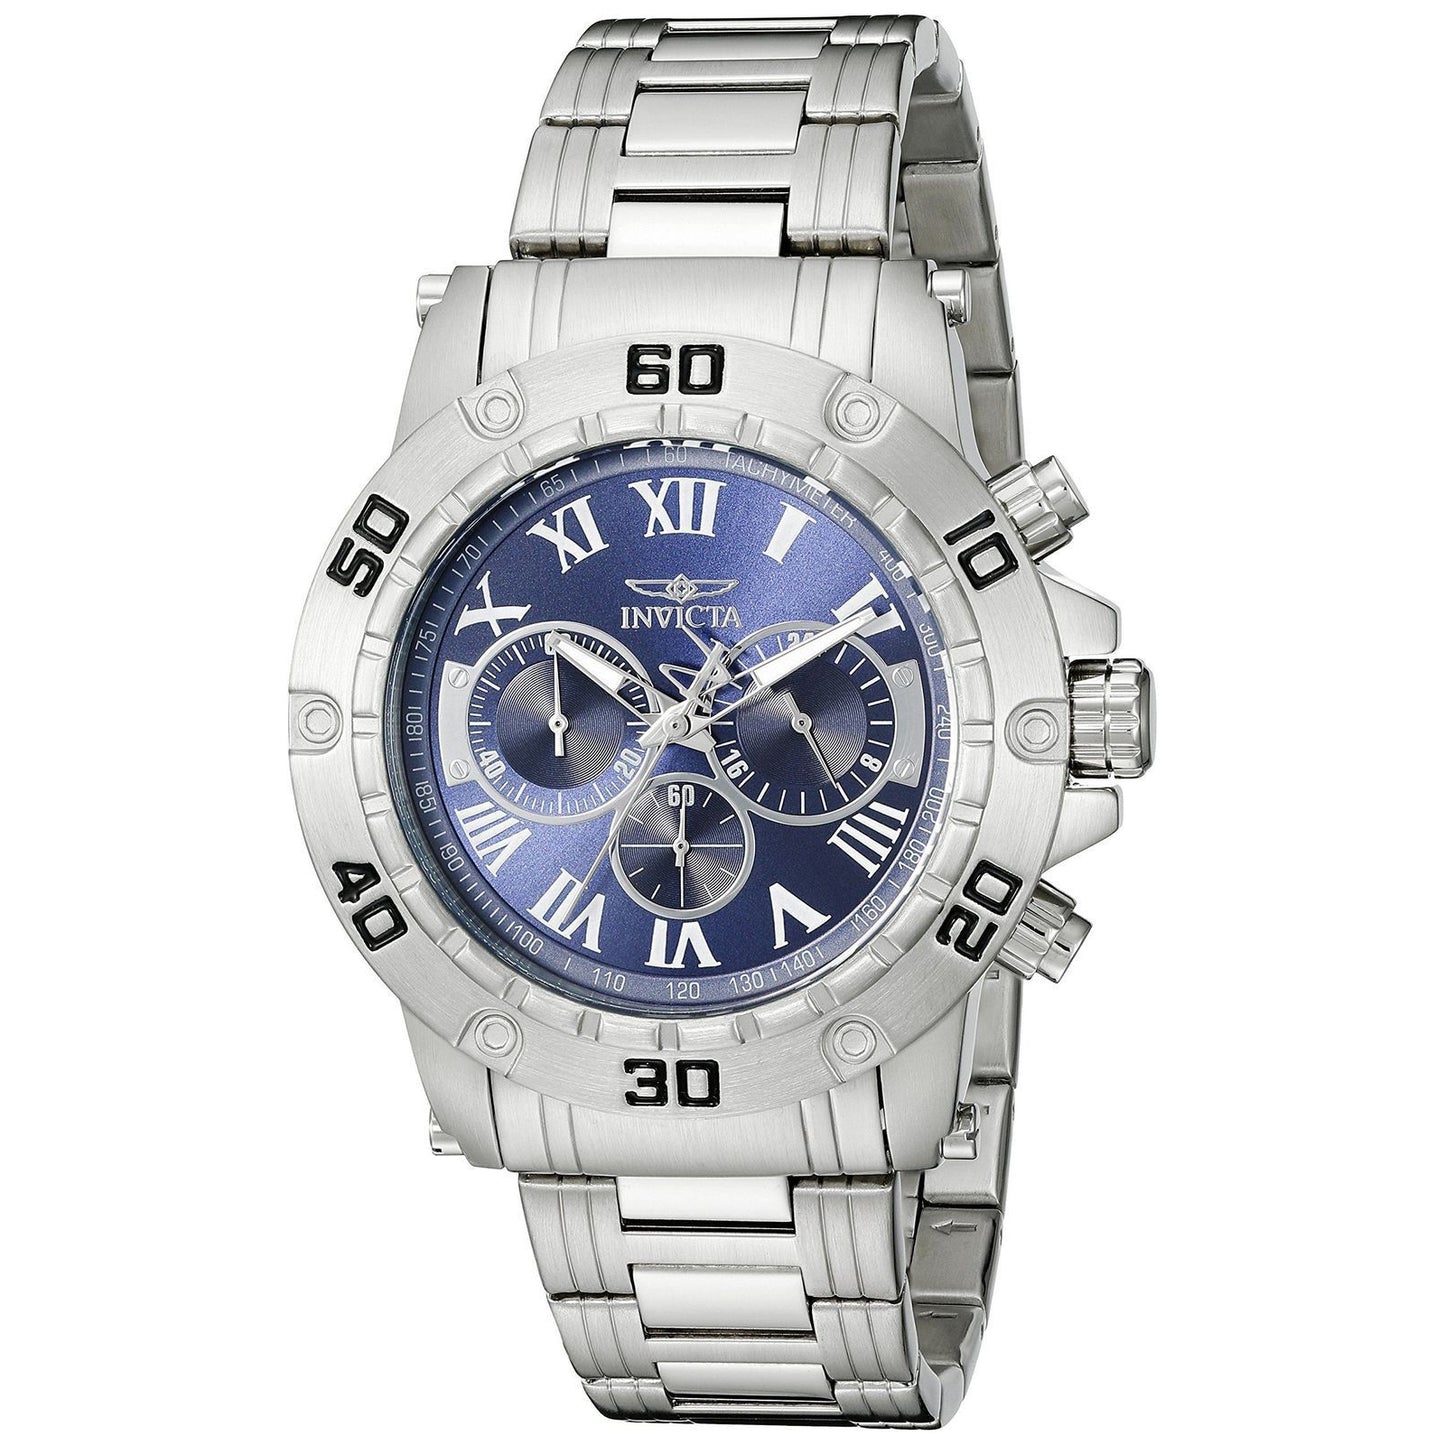 Invicta Specialty Men's Watch Silver Stainless steel (19697)